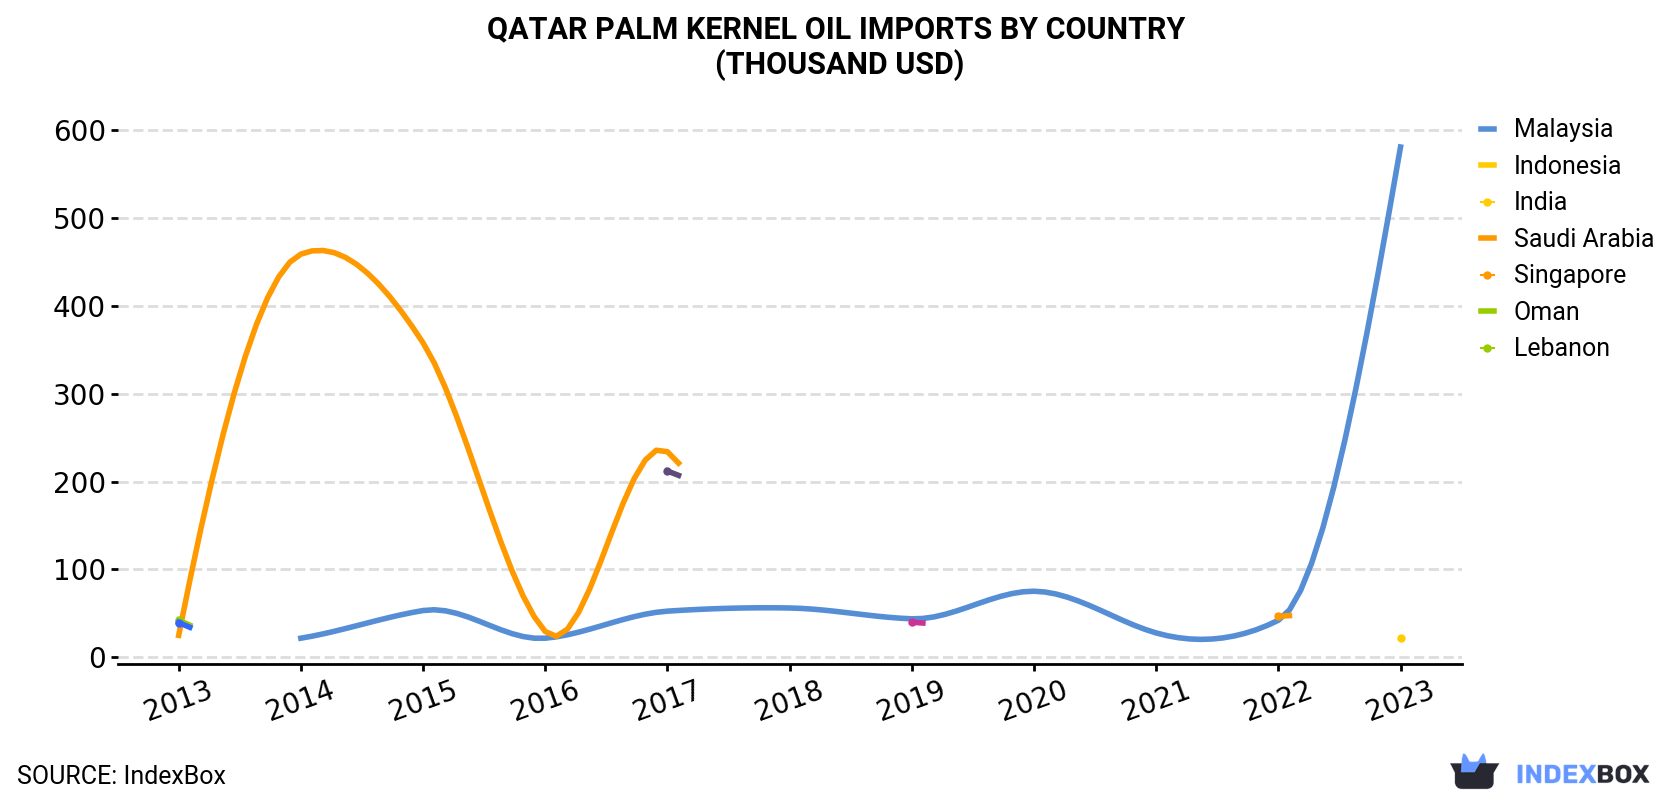 Qatar Palm Kernel Oil Imports By Country (Thousand USD)